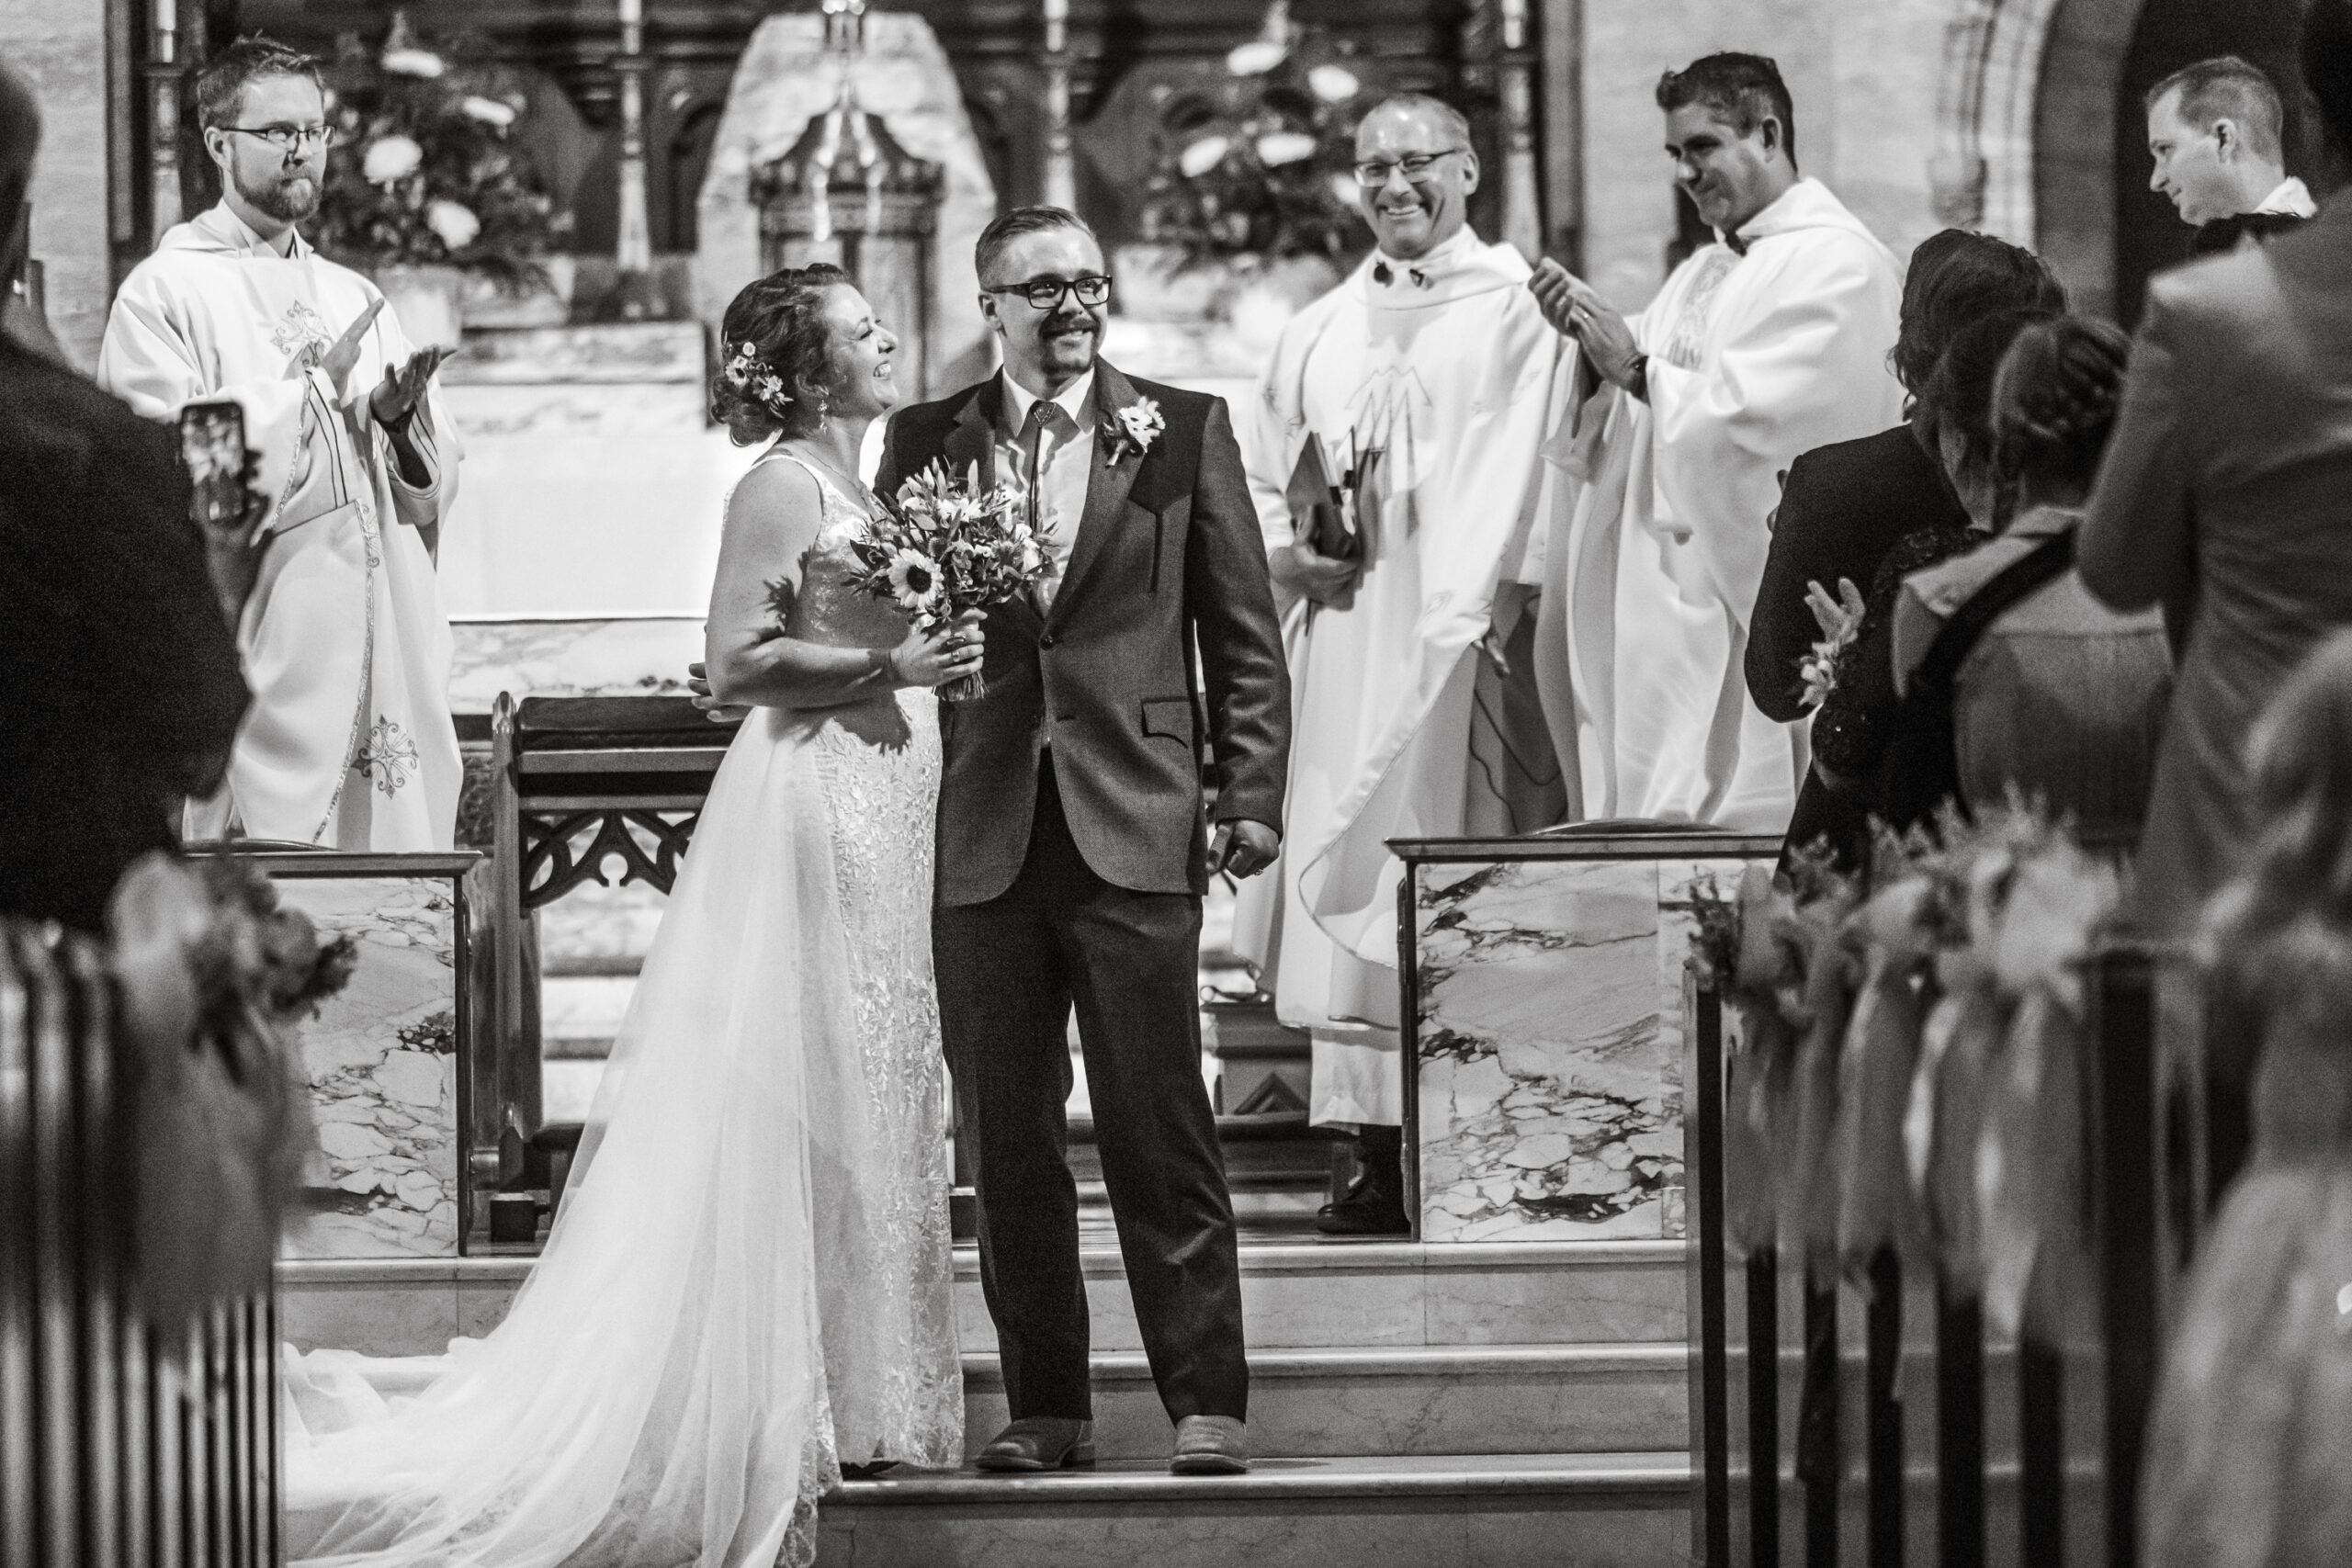 A bride and groom smile before attendees at their wedding at Holy Ghost Catholic Church in Denver, Colorado.